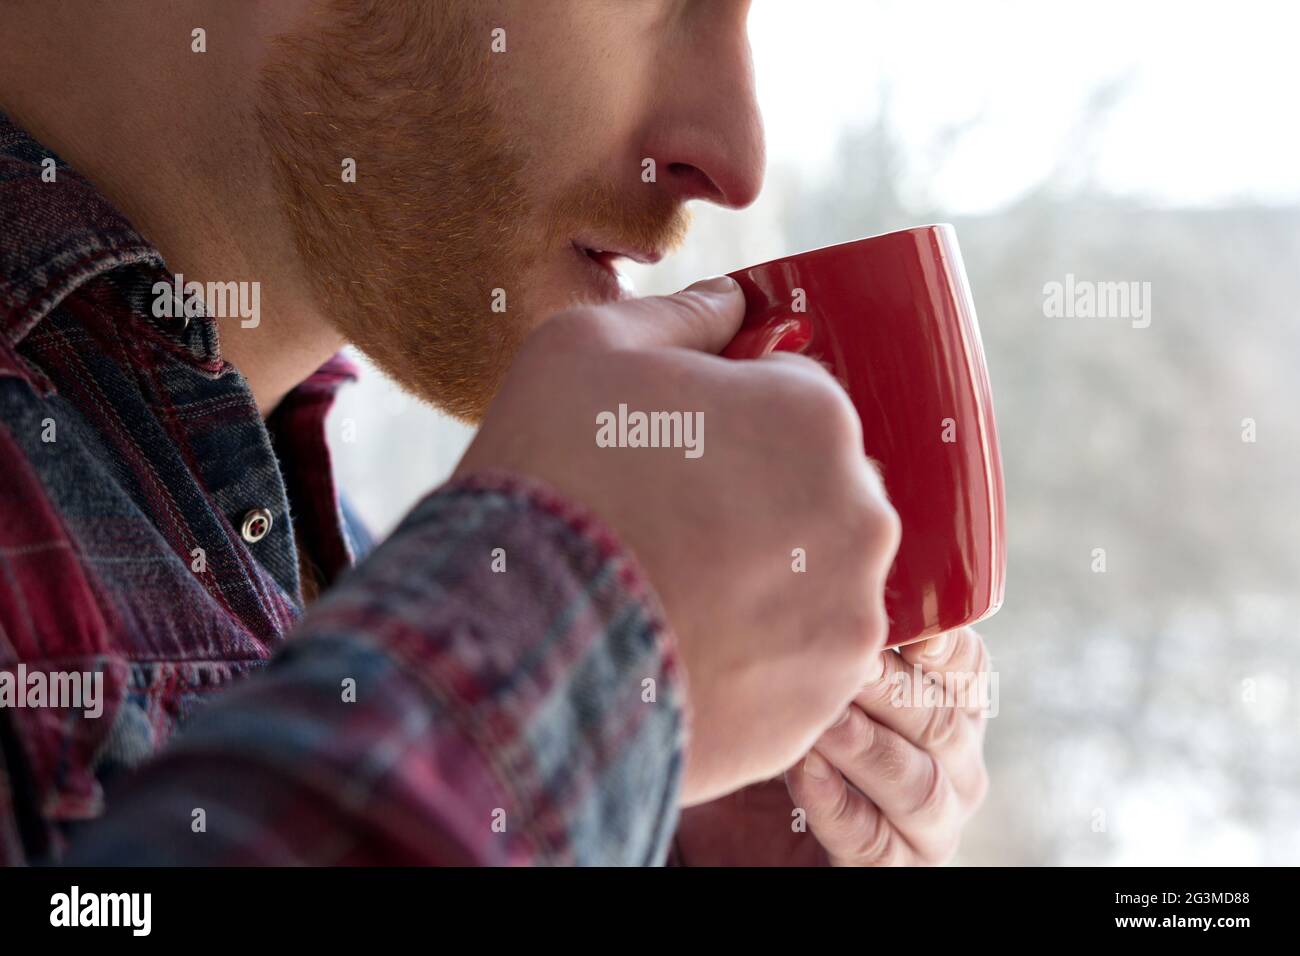 Man taking sip from cup. Stock Photo